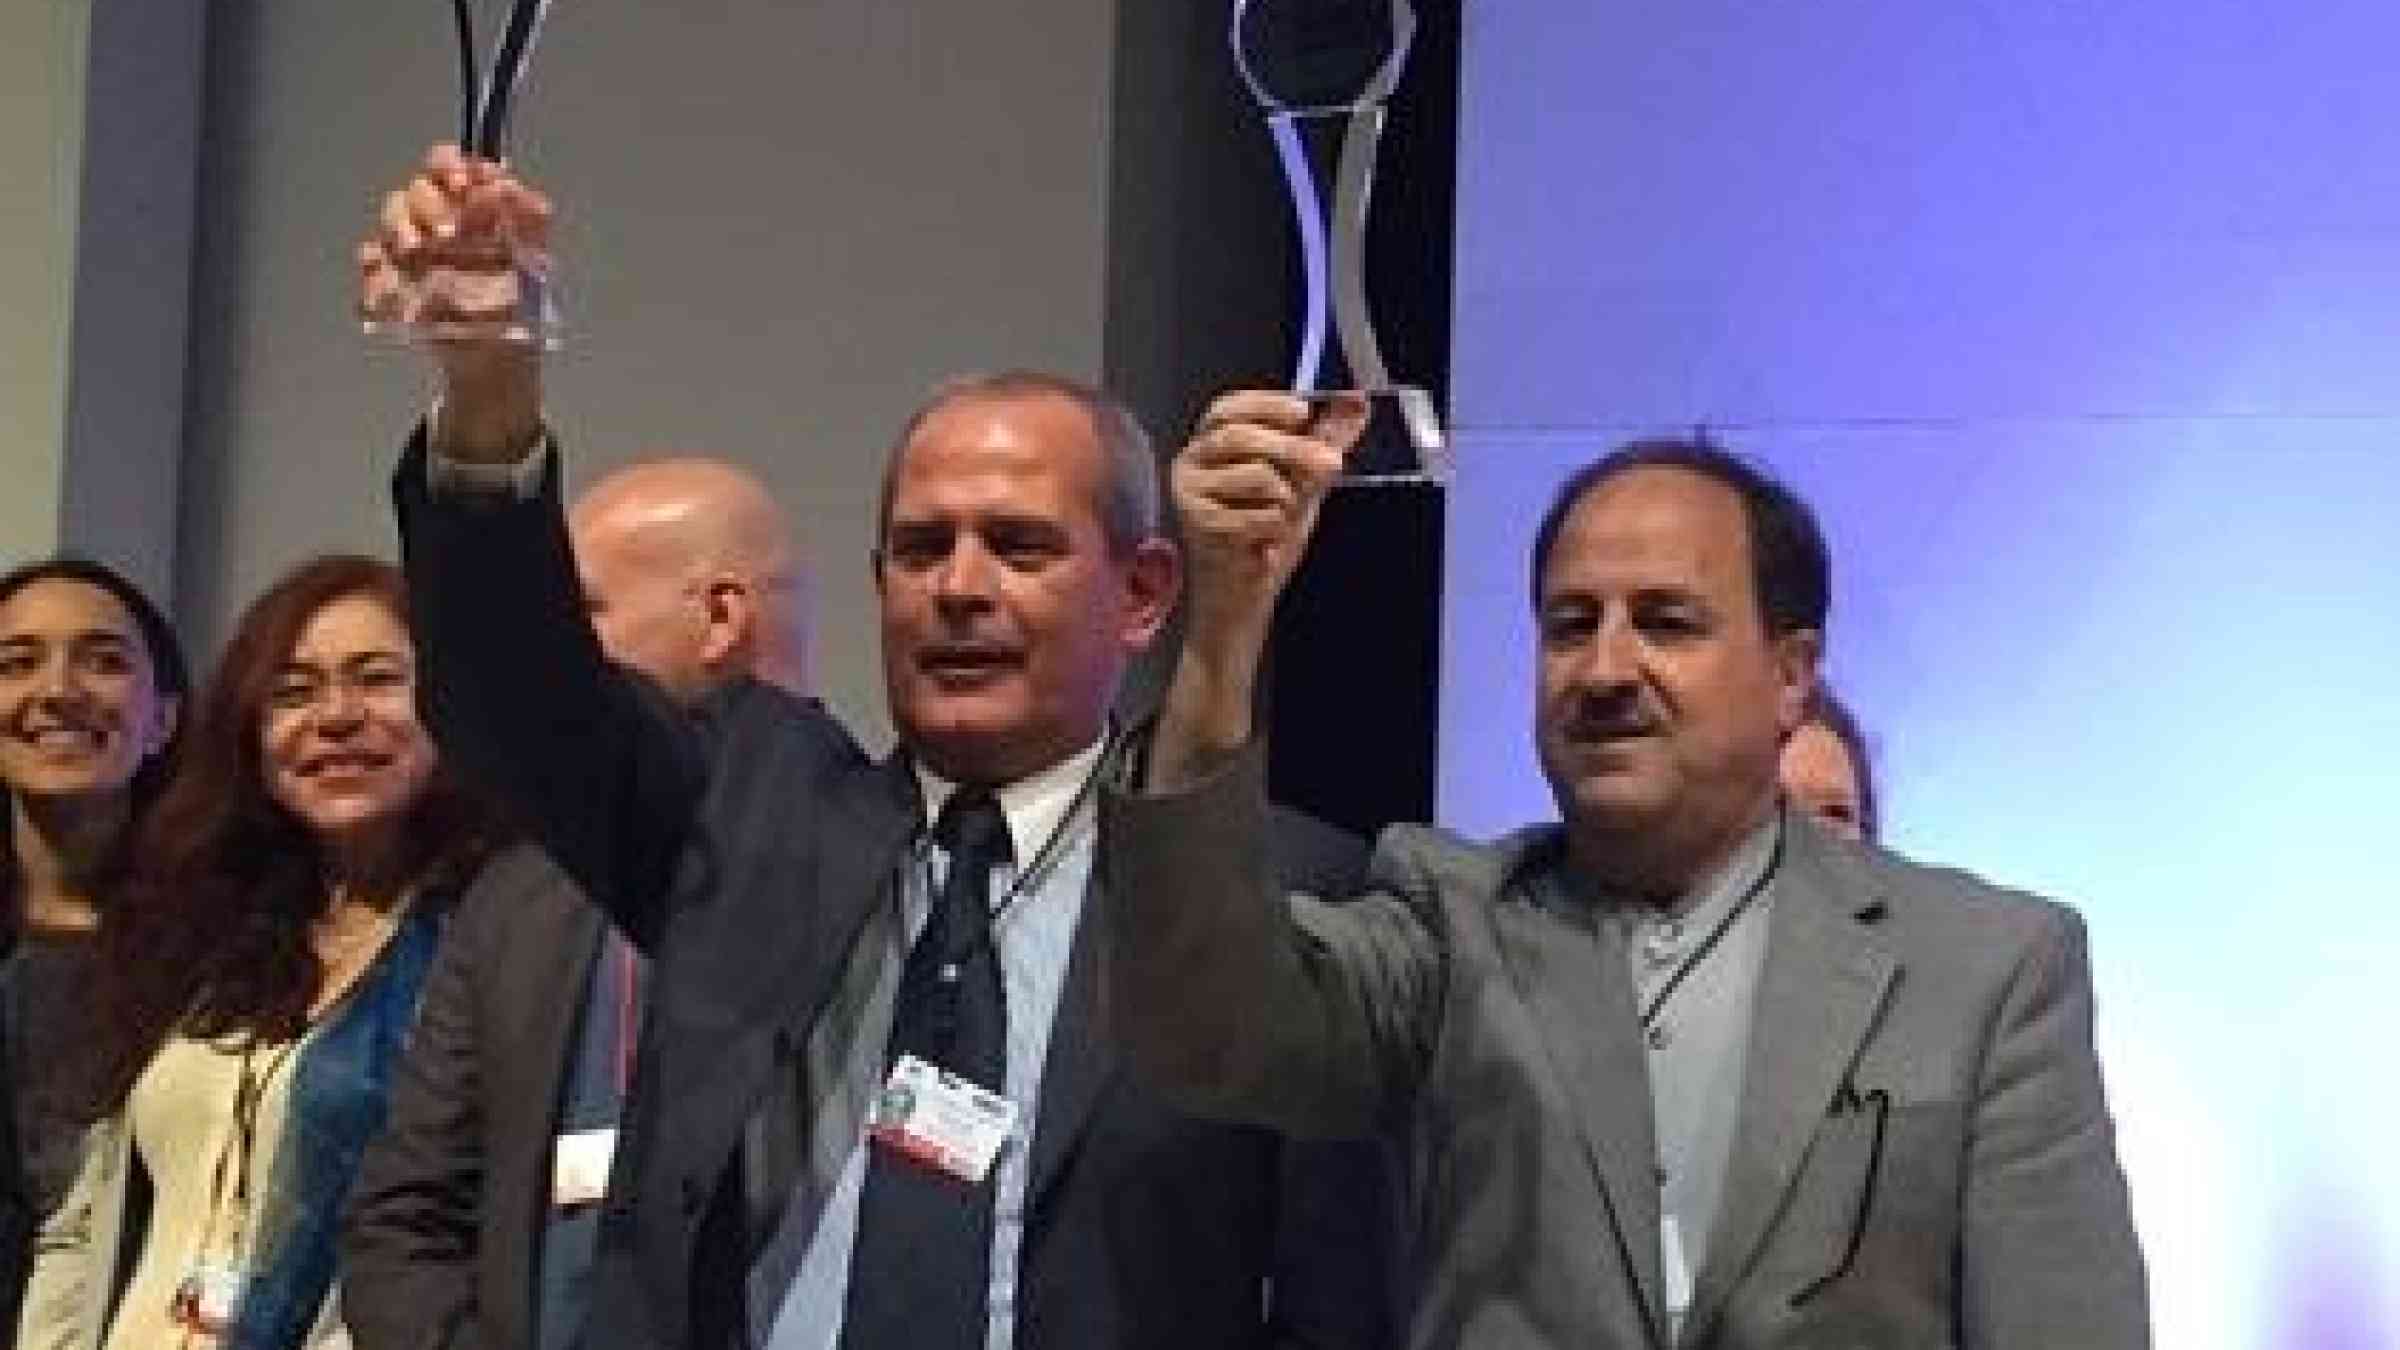 The Deputy Mayor of Amadora Mr Eduardo Rosa (left) and the Iranian Ambassador to Mexico, H.E. Mr Mohammad Taghi Hossieni show off their trophies (Photo: UNISDR)